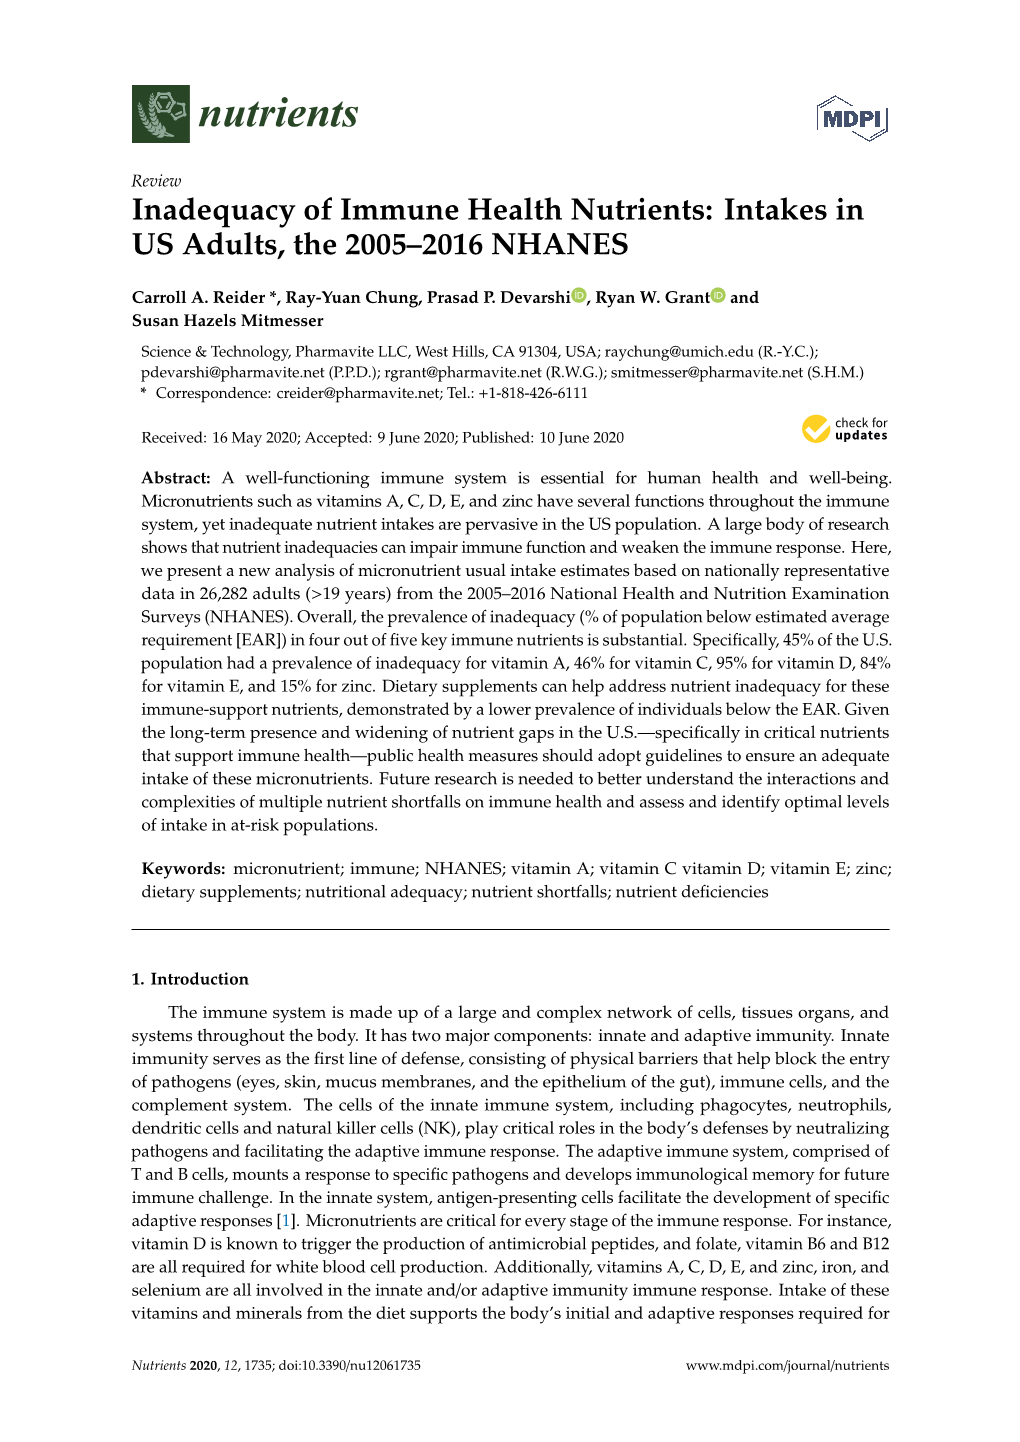 Inadequacy of Immune Health Nutrients: Intakes in US Adults, the 2005–2016 NHANES